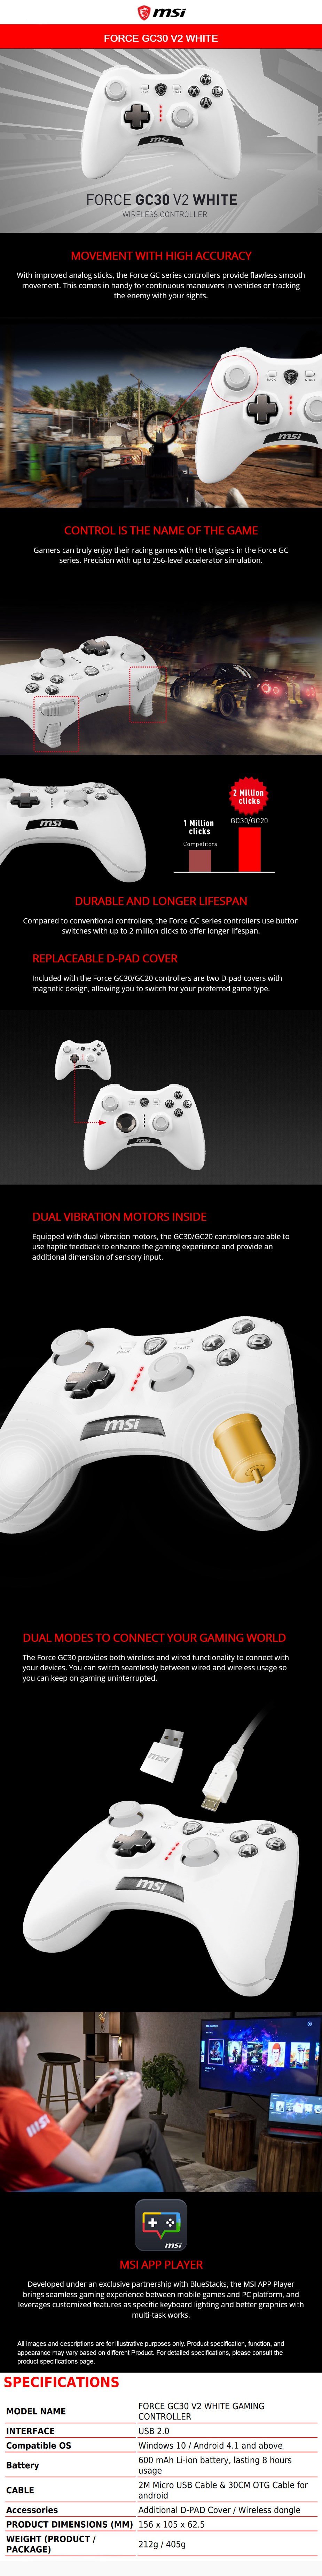 A large marketing image providing additional information about the product MSI Force GC30 V2 Wireless Controller White - Additional alt info not provided